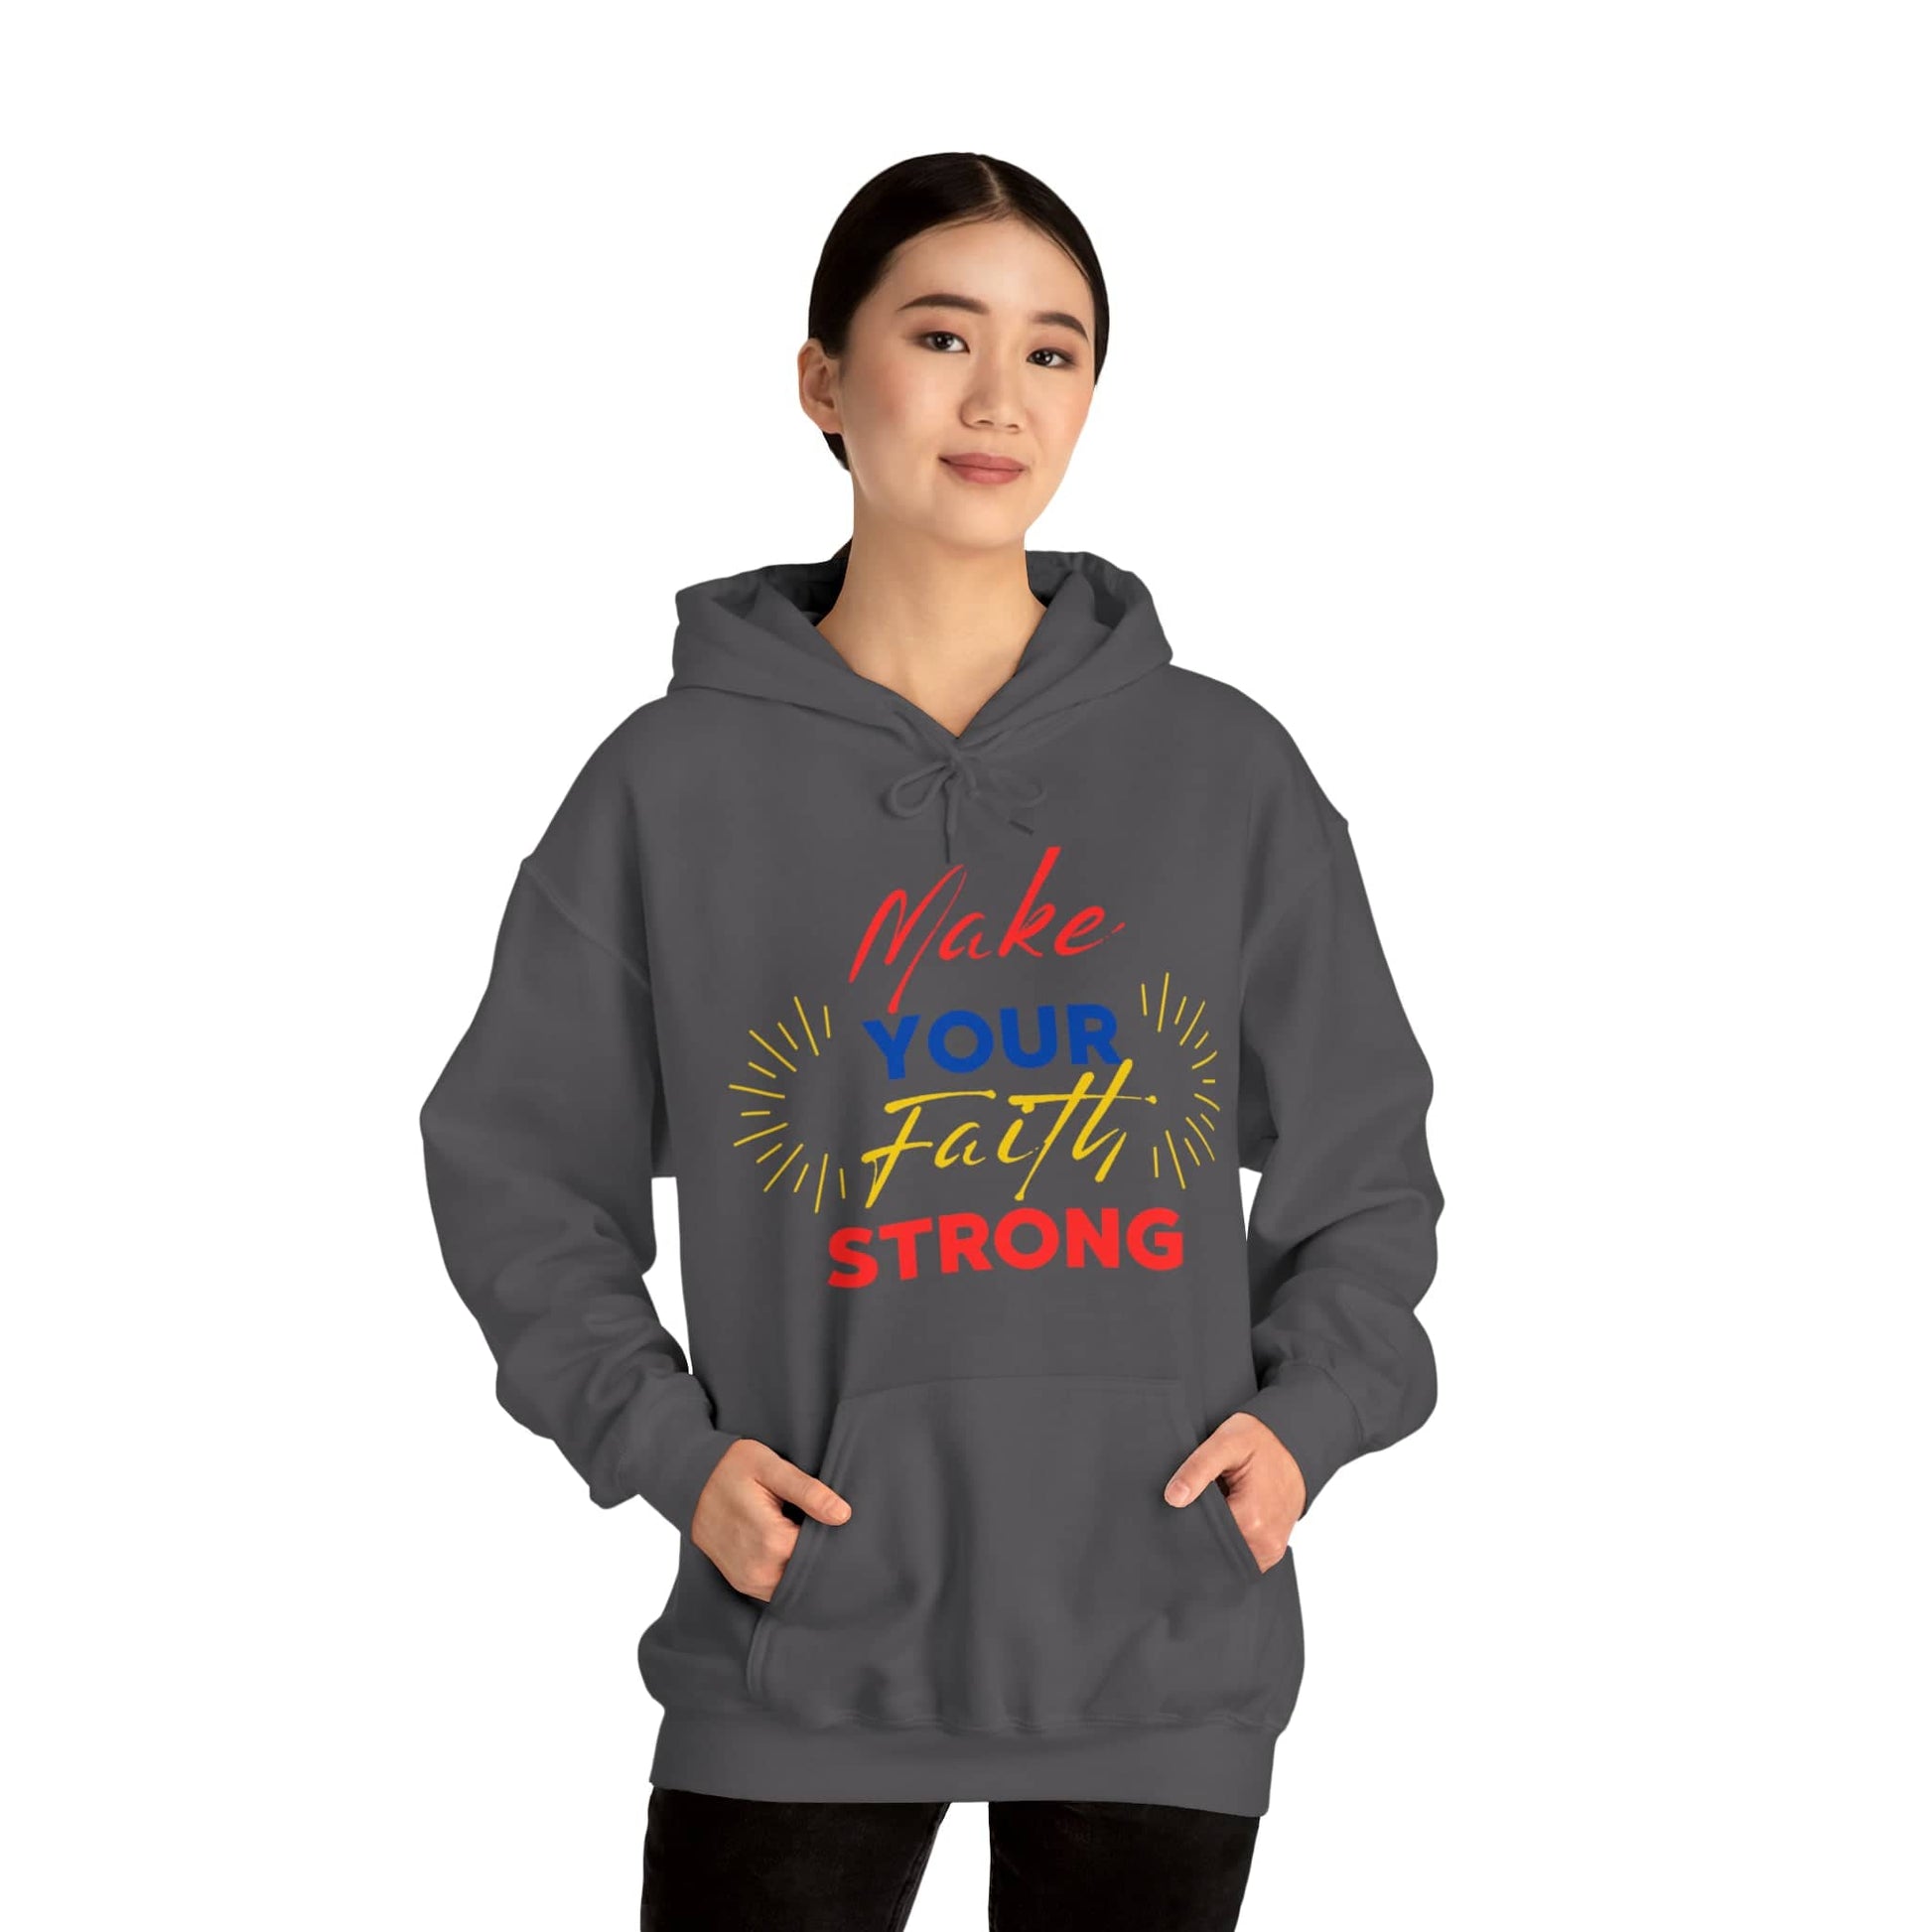 FaithFortress: Make Your Faith Strong' Unisex Hoodie Hoodie Bigger Than Life Charcoal S 